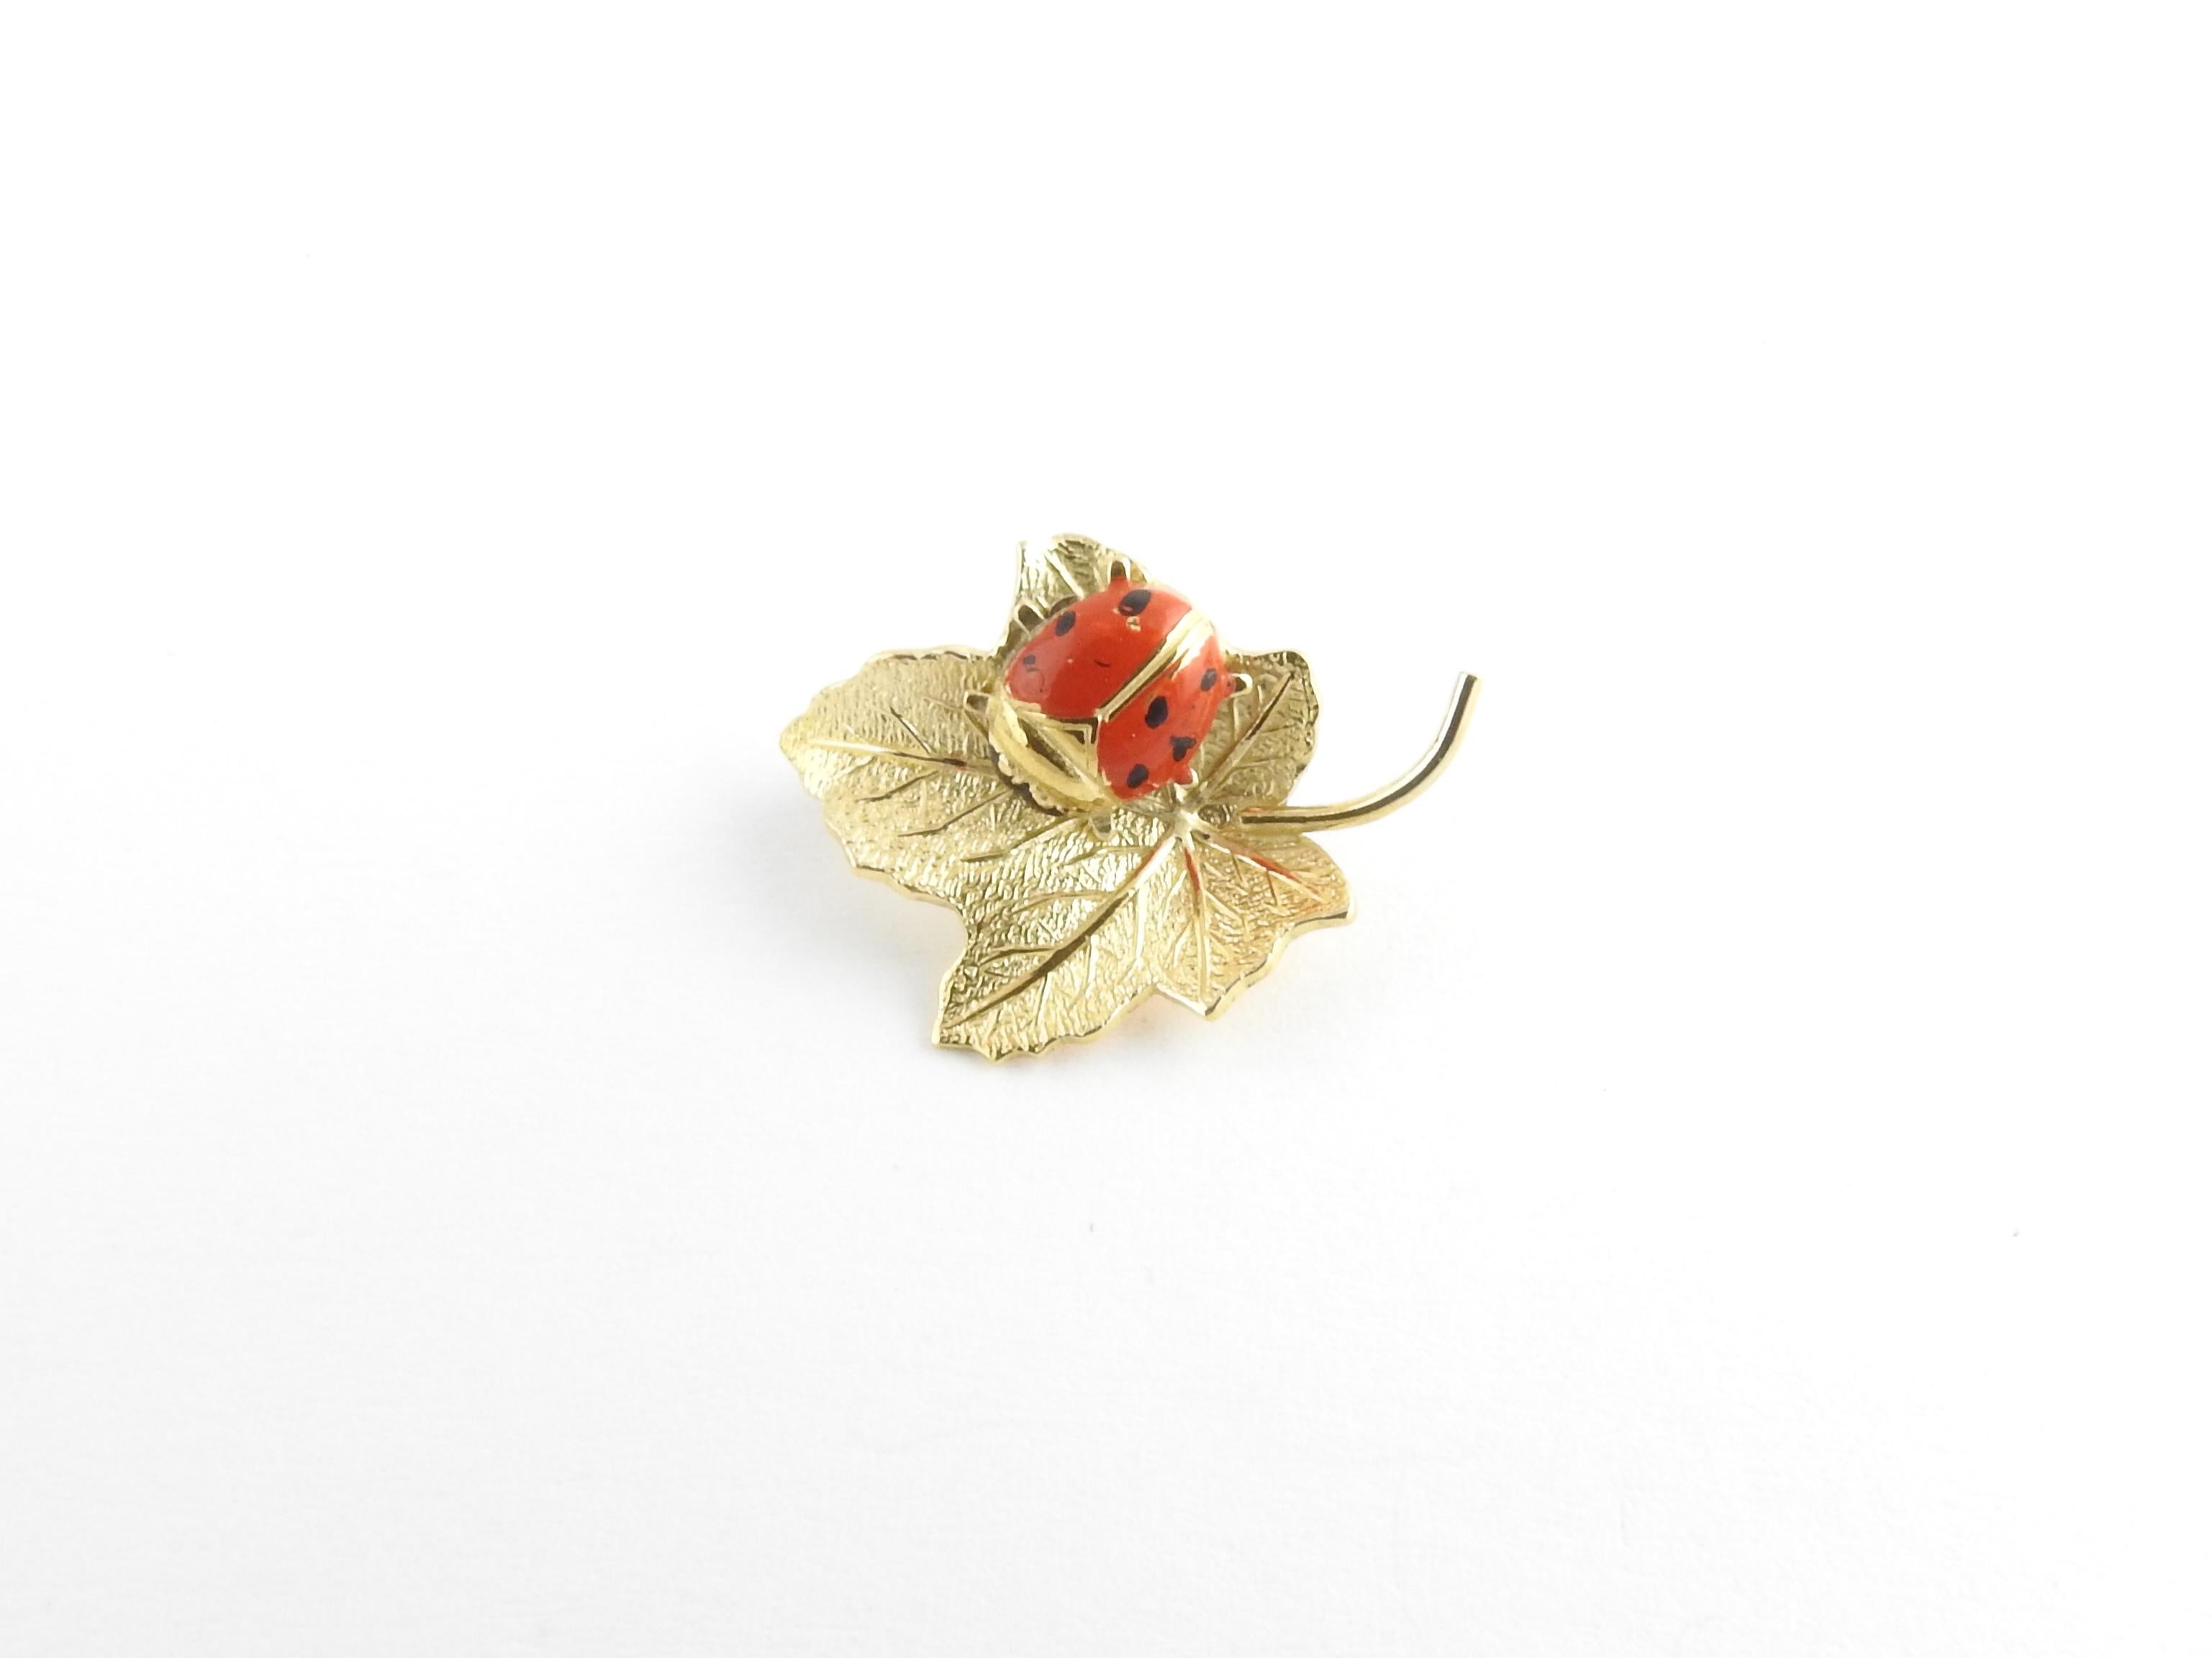 Vintage 14 Karat Yellow Gold Leaf and Ladybug Pin/Brooch

This lovely brooch features an adorable enameled ladybug sitting atop a beautifully detailed leaf. Crafted in classic 14K yellow gold.

Size: 22 mm x 16 mm

Weight: 1.3 dwt. / 2.1 gr.

Acid